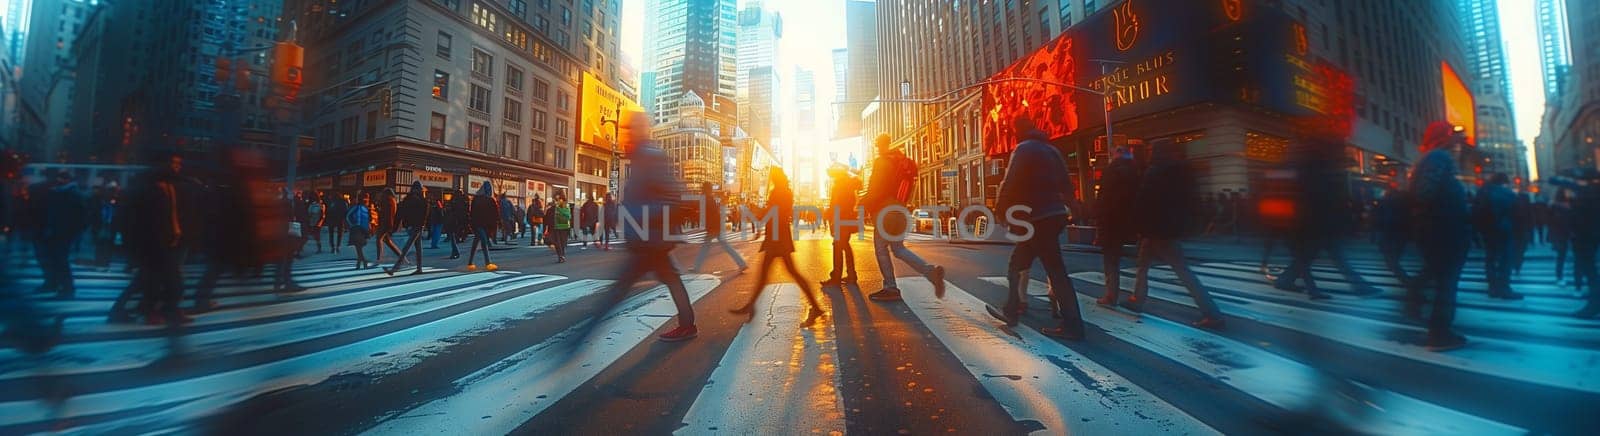 Blurred image of a crowd strolling on a city street at sunset by richwolf